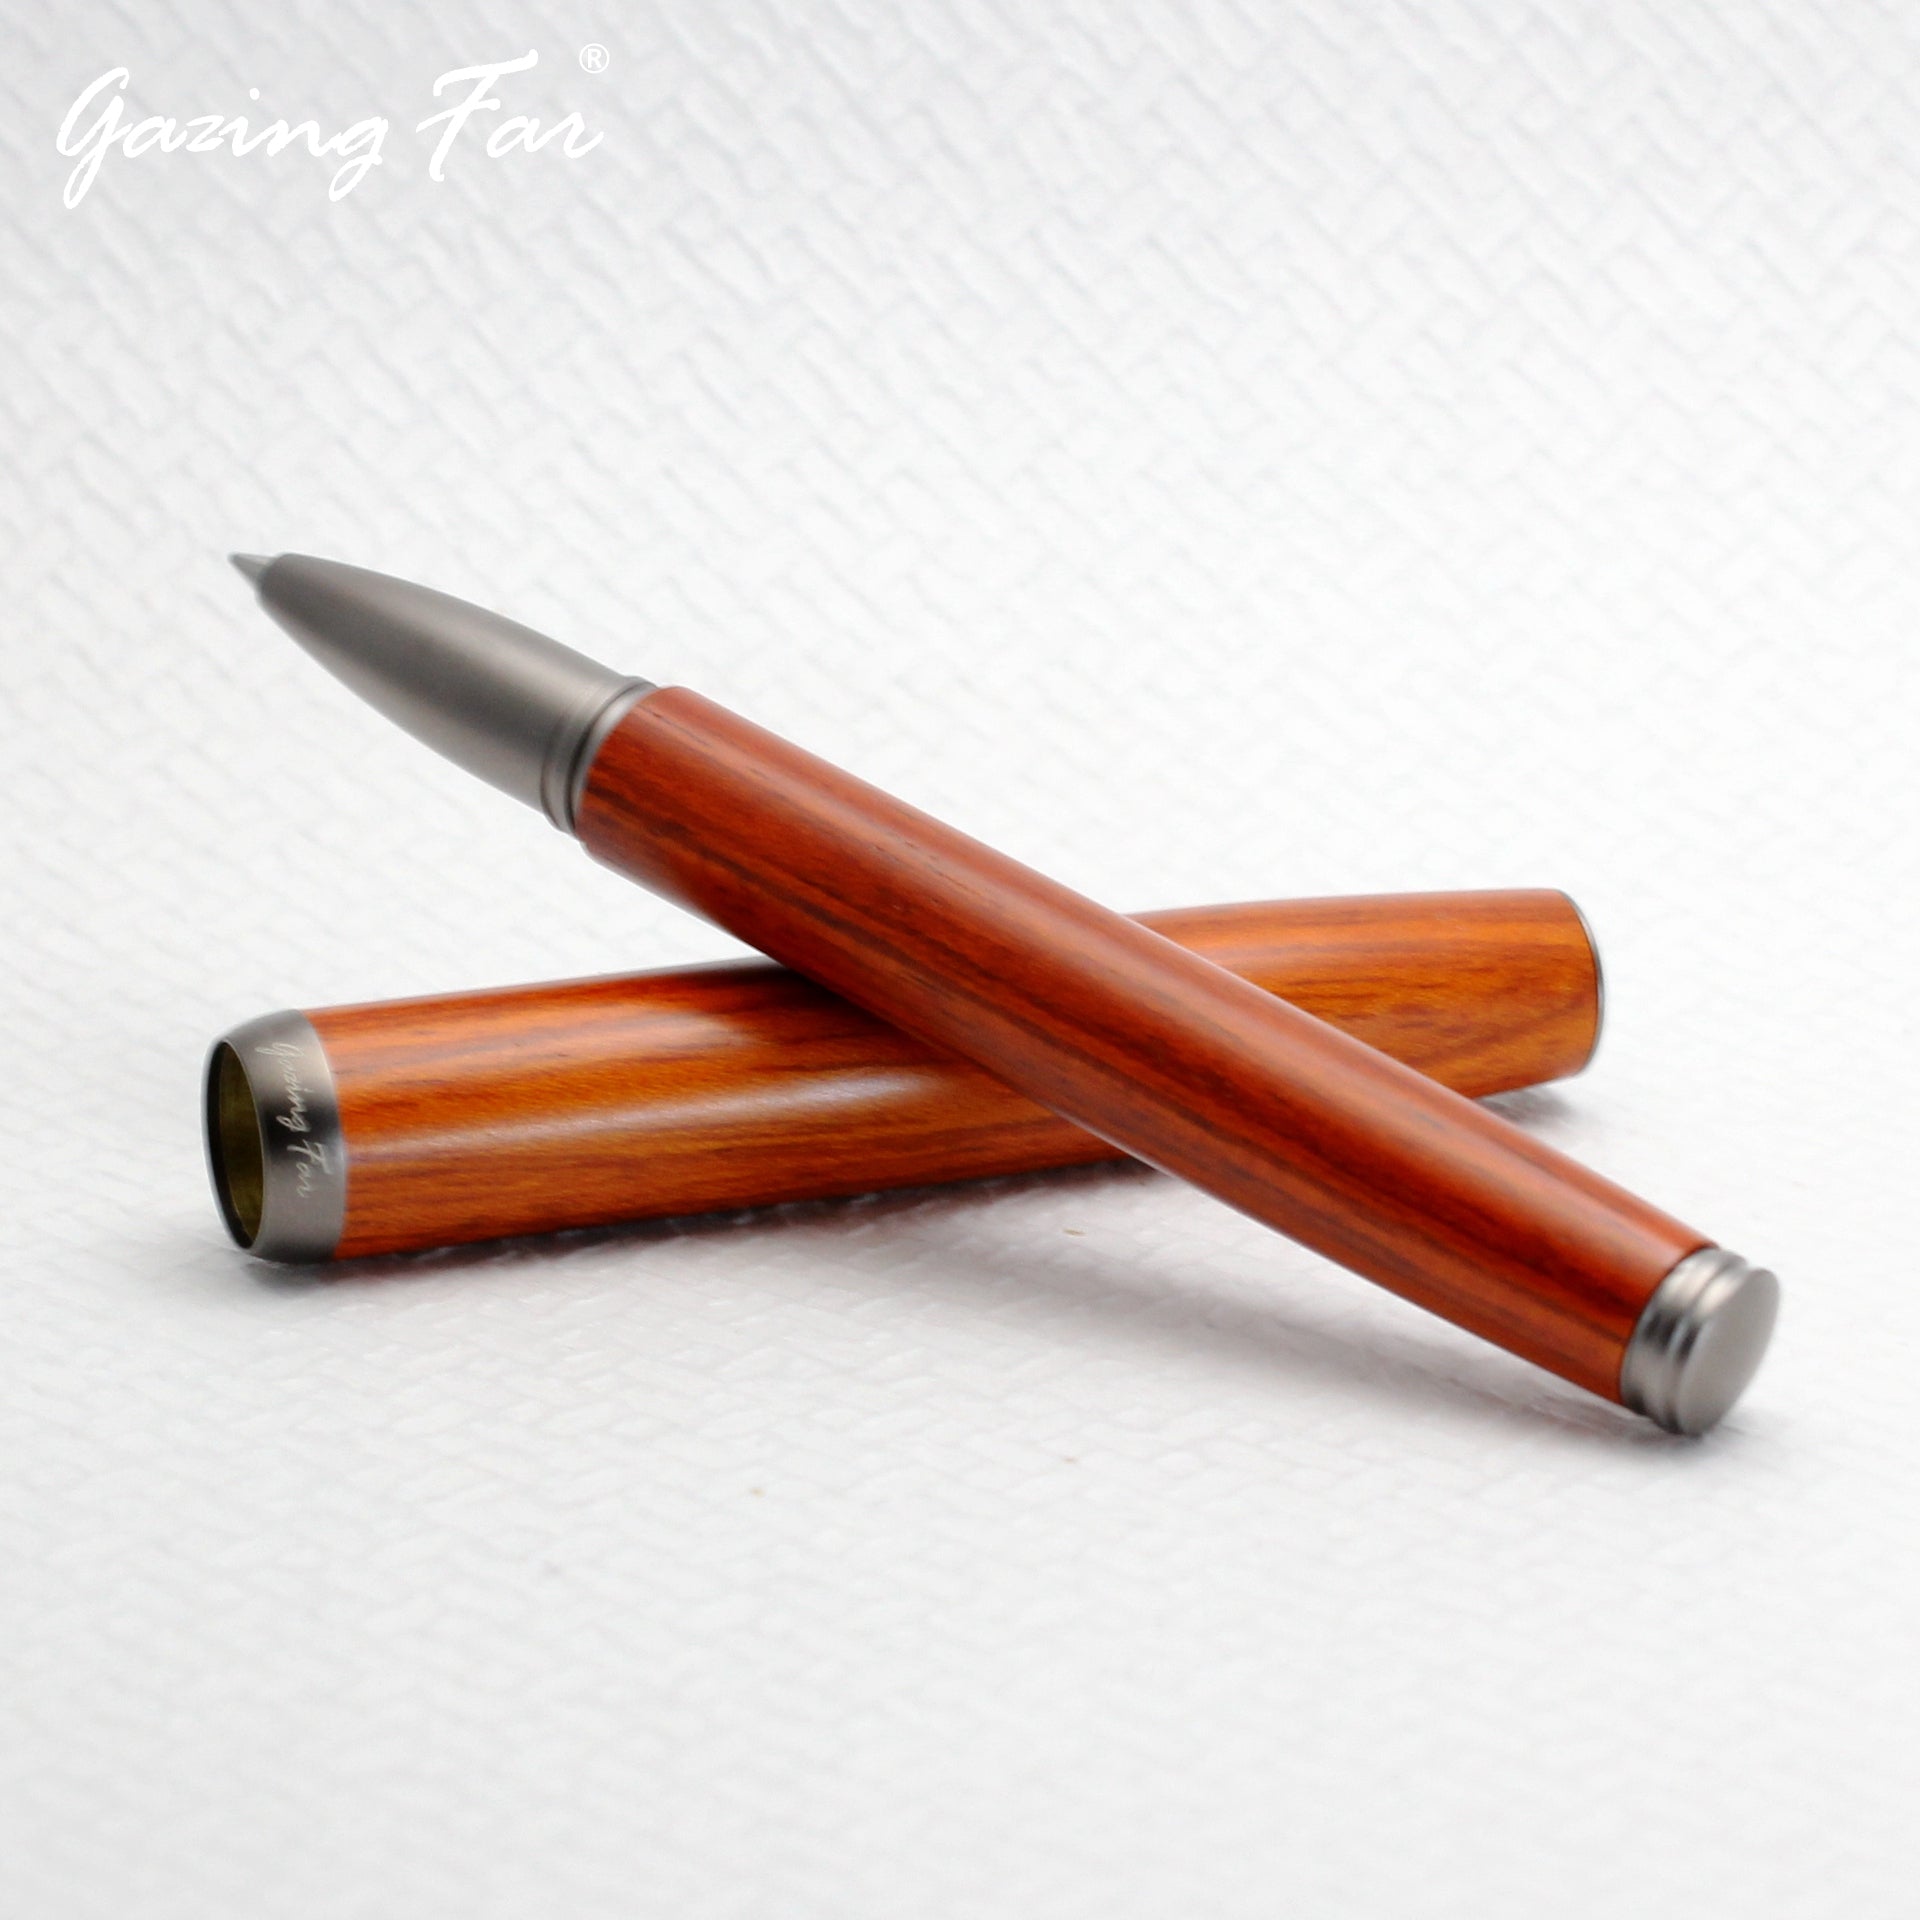 tmX Wooden Roller Ball Pen, tiny and petite